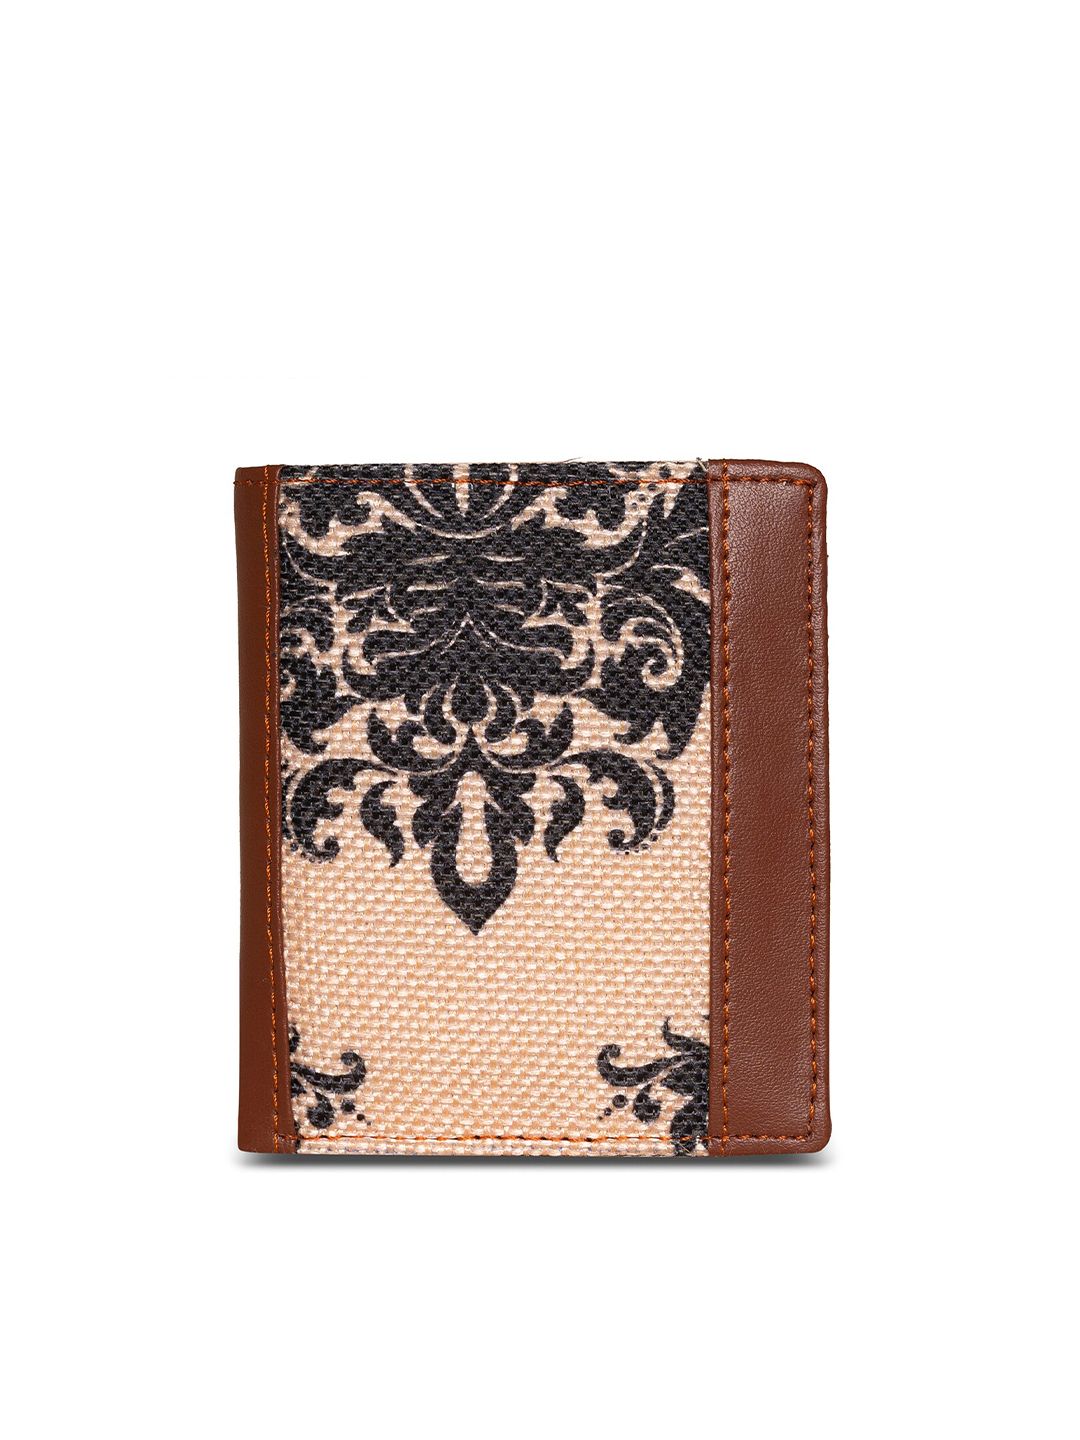 ZOUK Unisex Peach & Brown Printed Two Fold Wallet Price in India